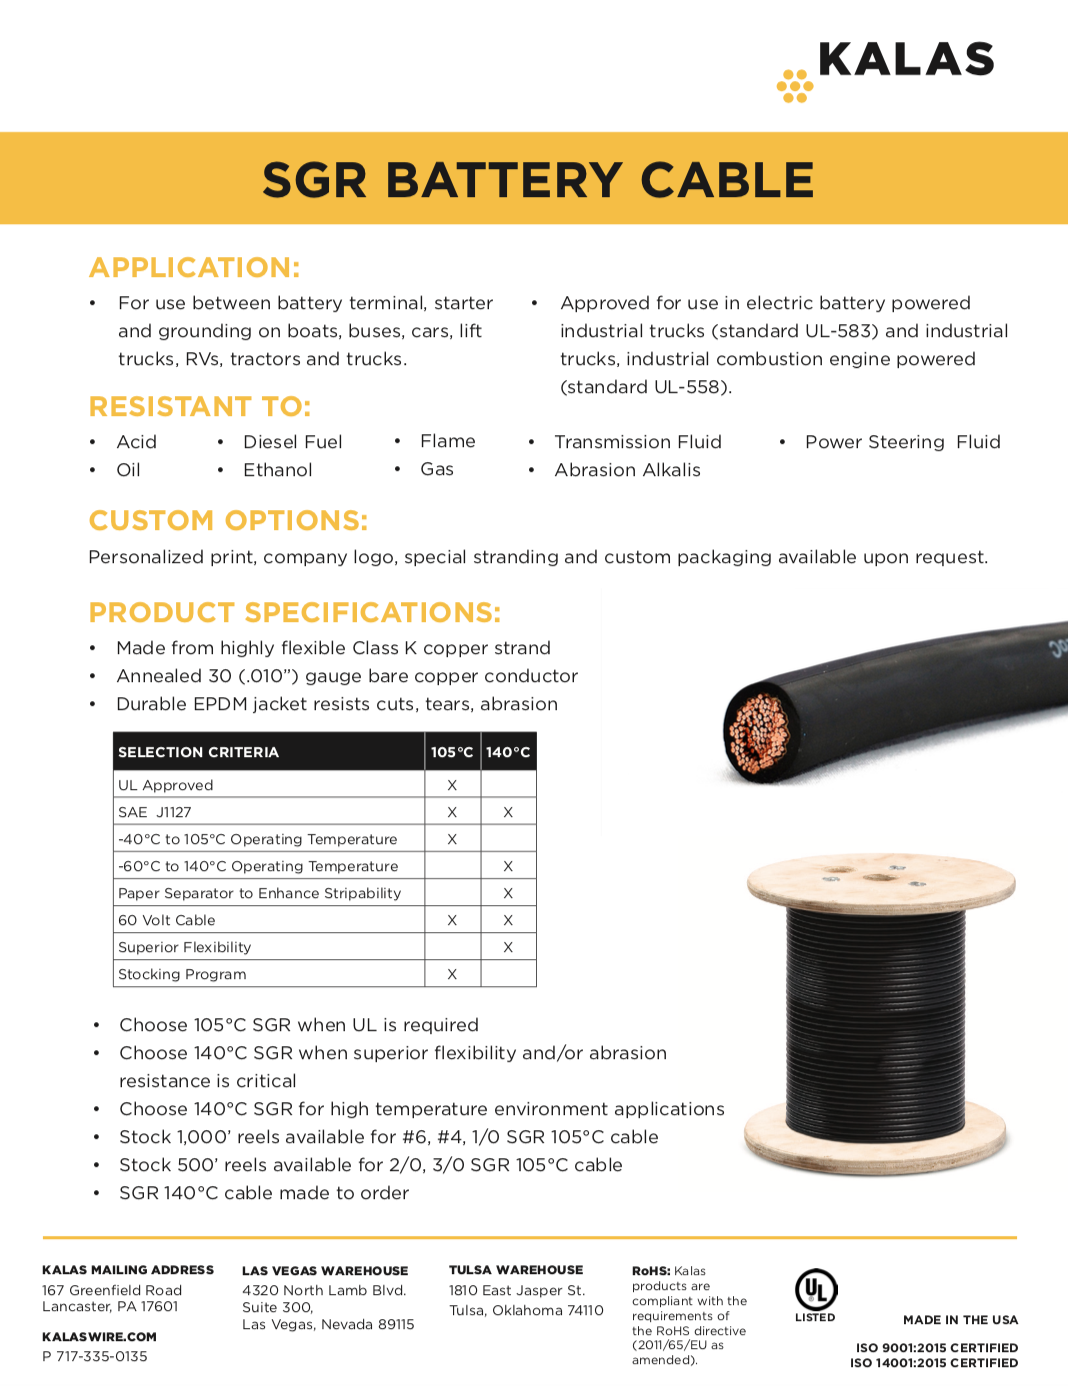 SGR Battery Cable 105 & 140 